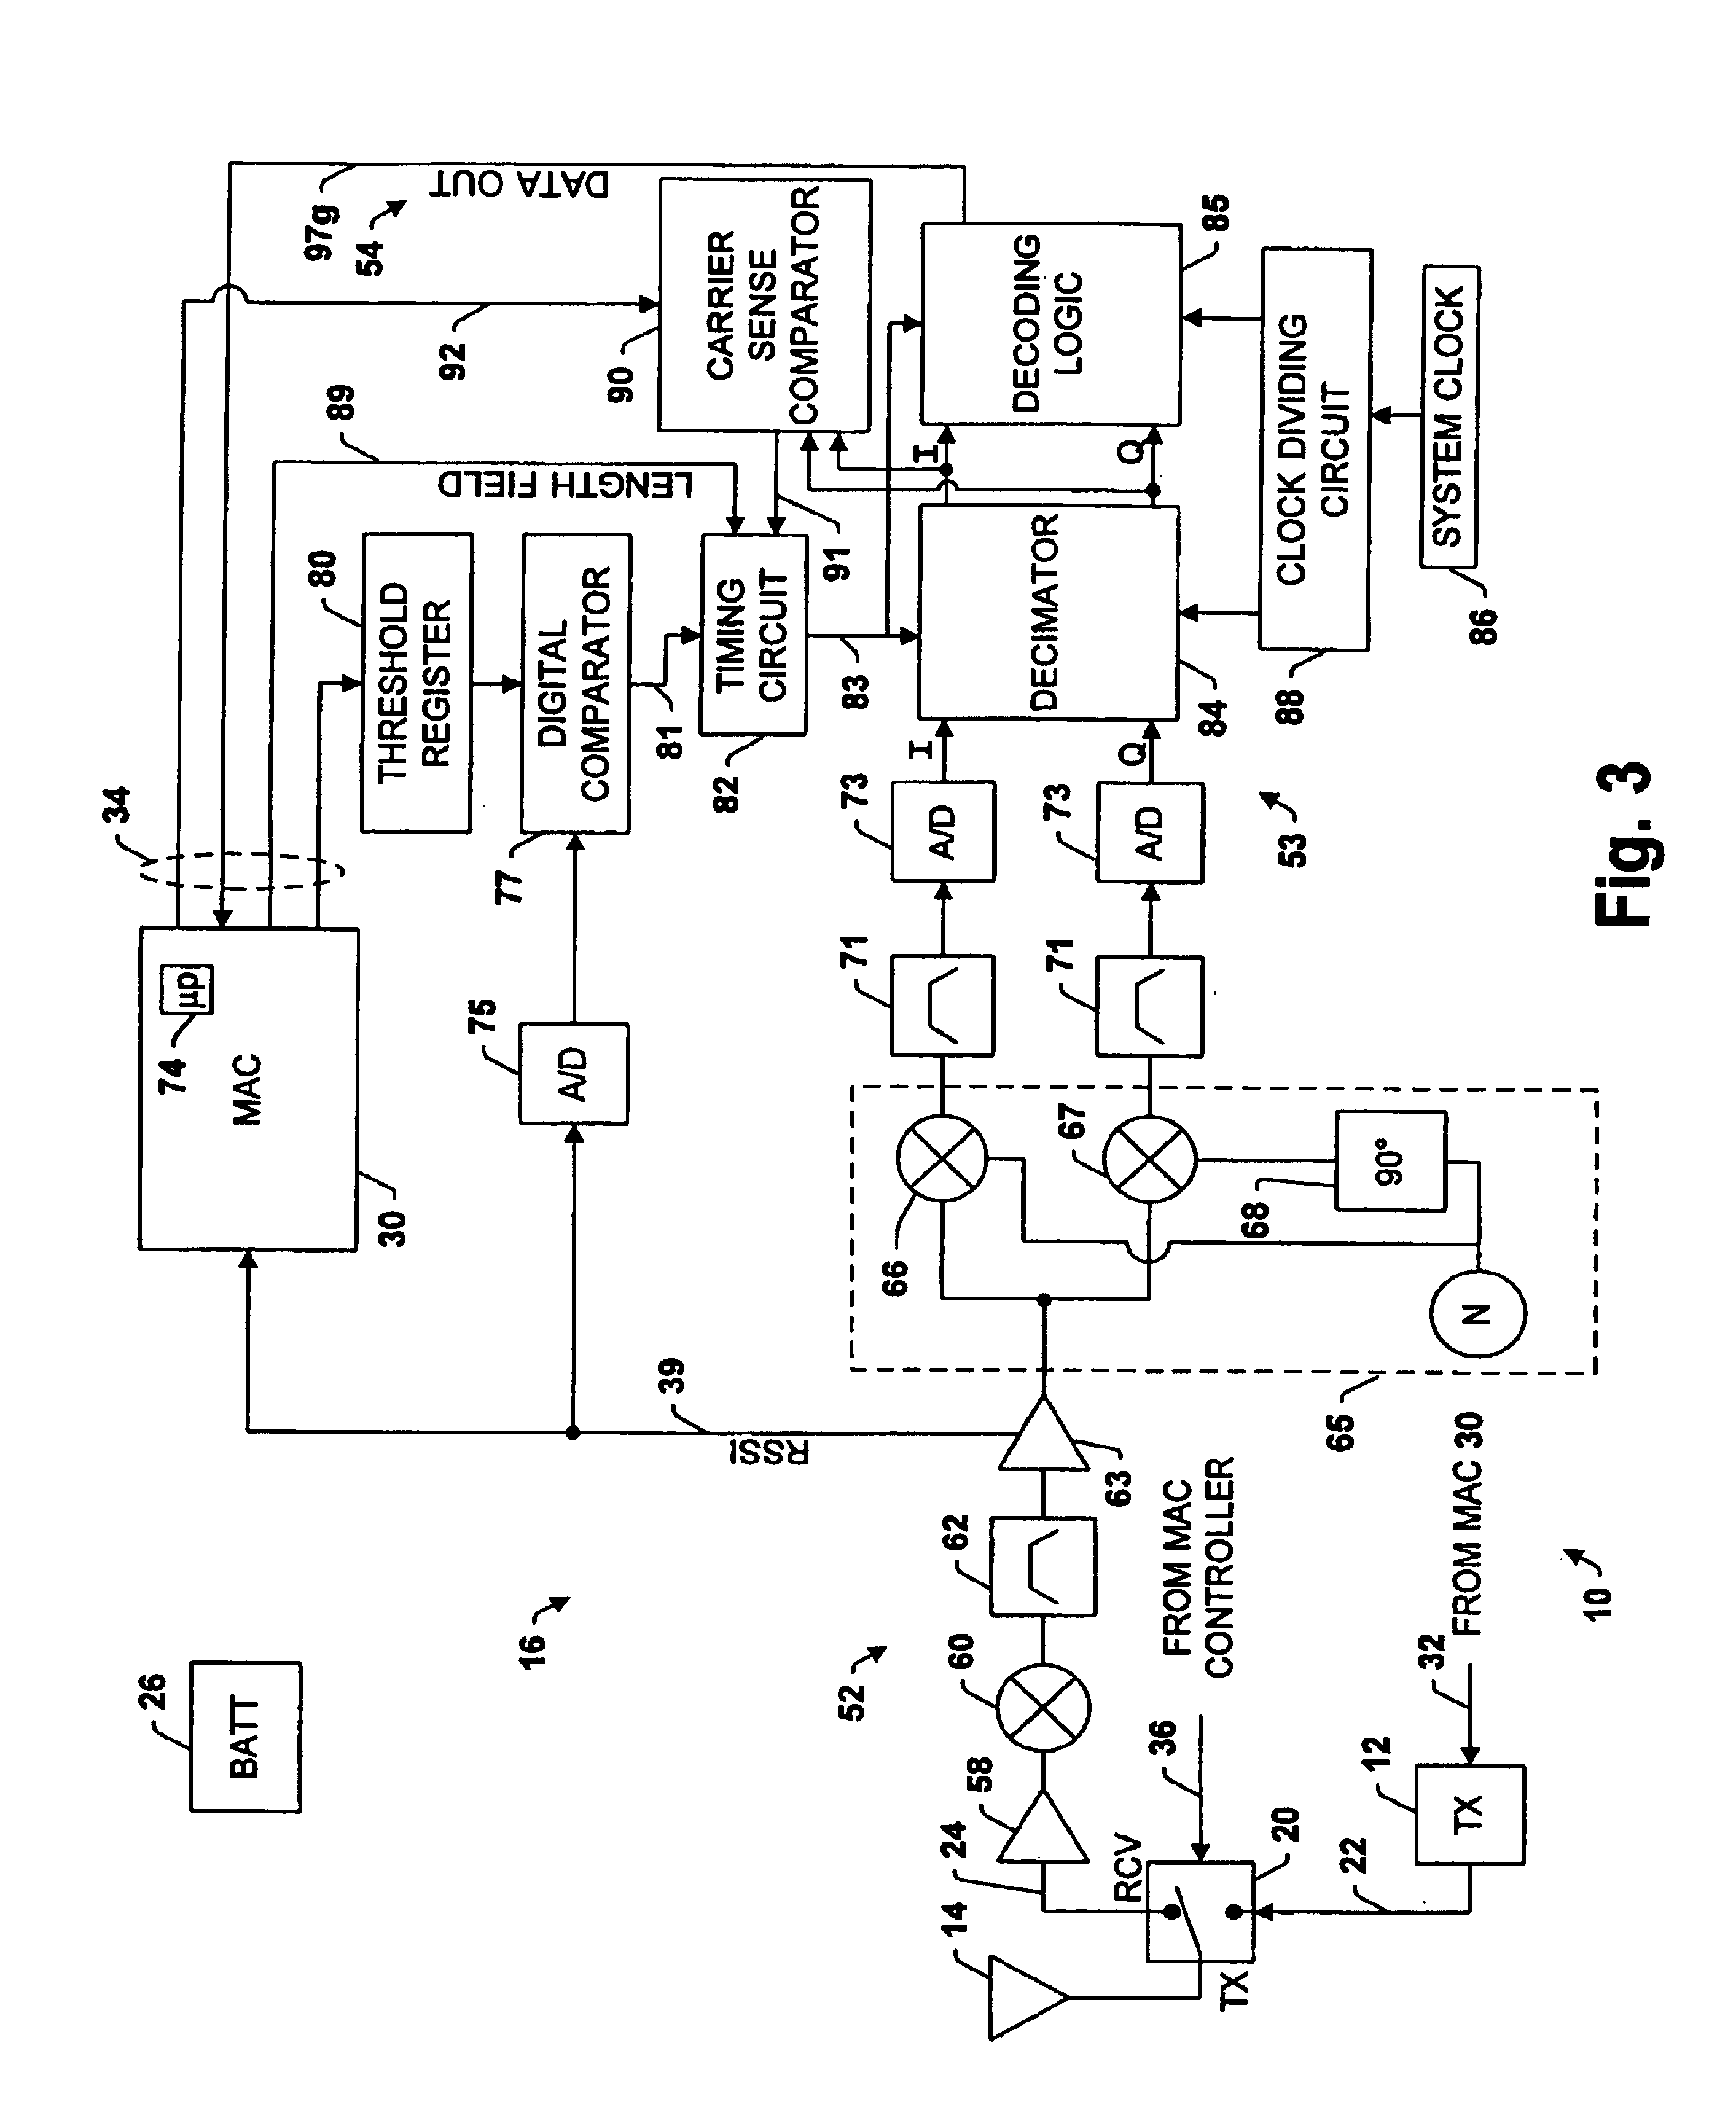 Transceiver control with sleep mode operation